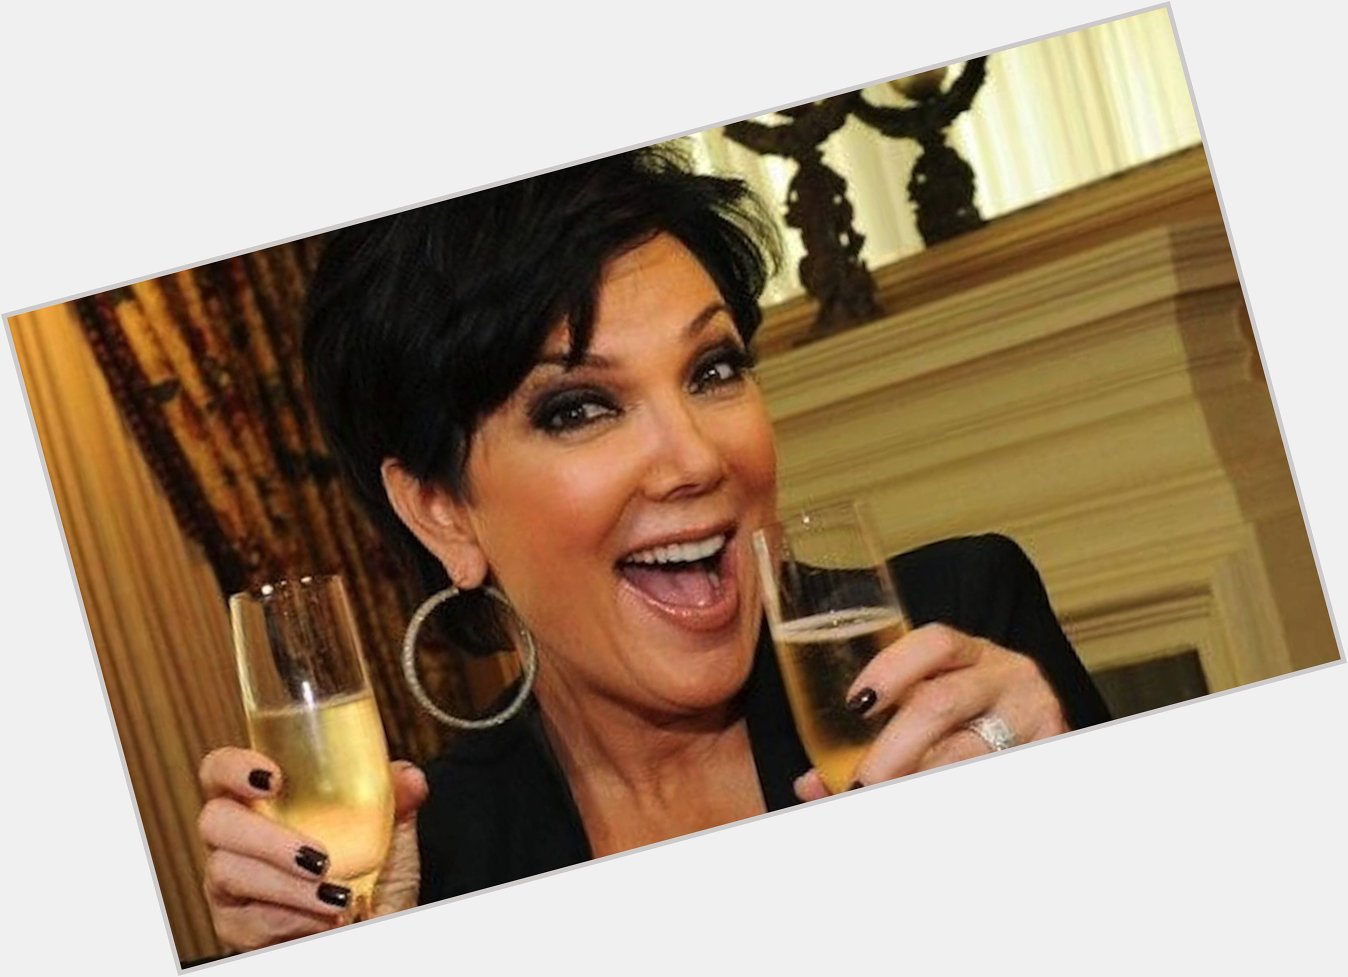 Happy birthday to my number one 2017 mood board inspiration, Kris Jenner!!! 